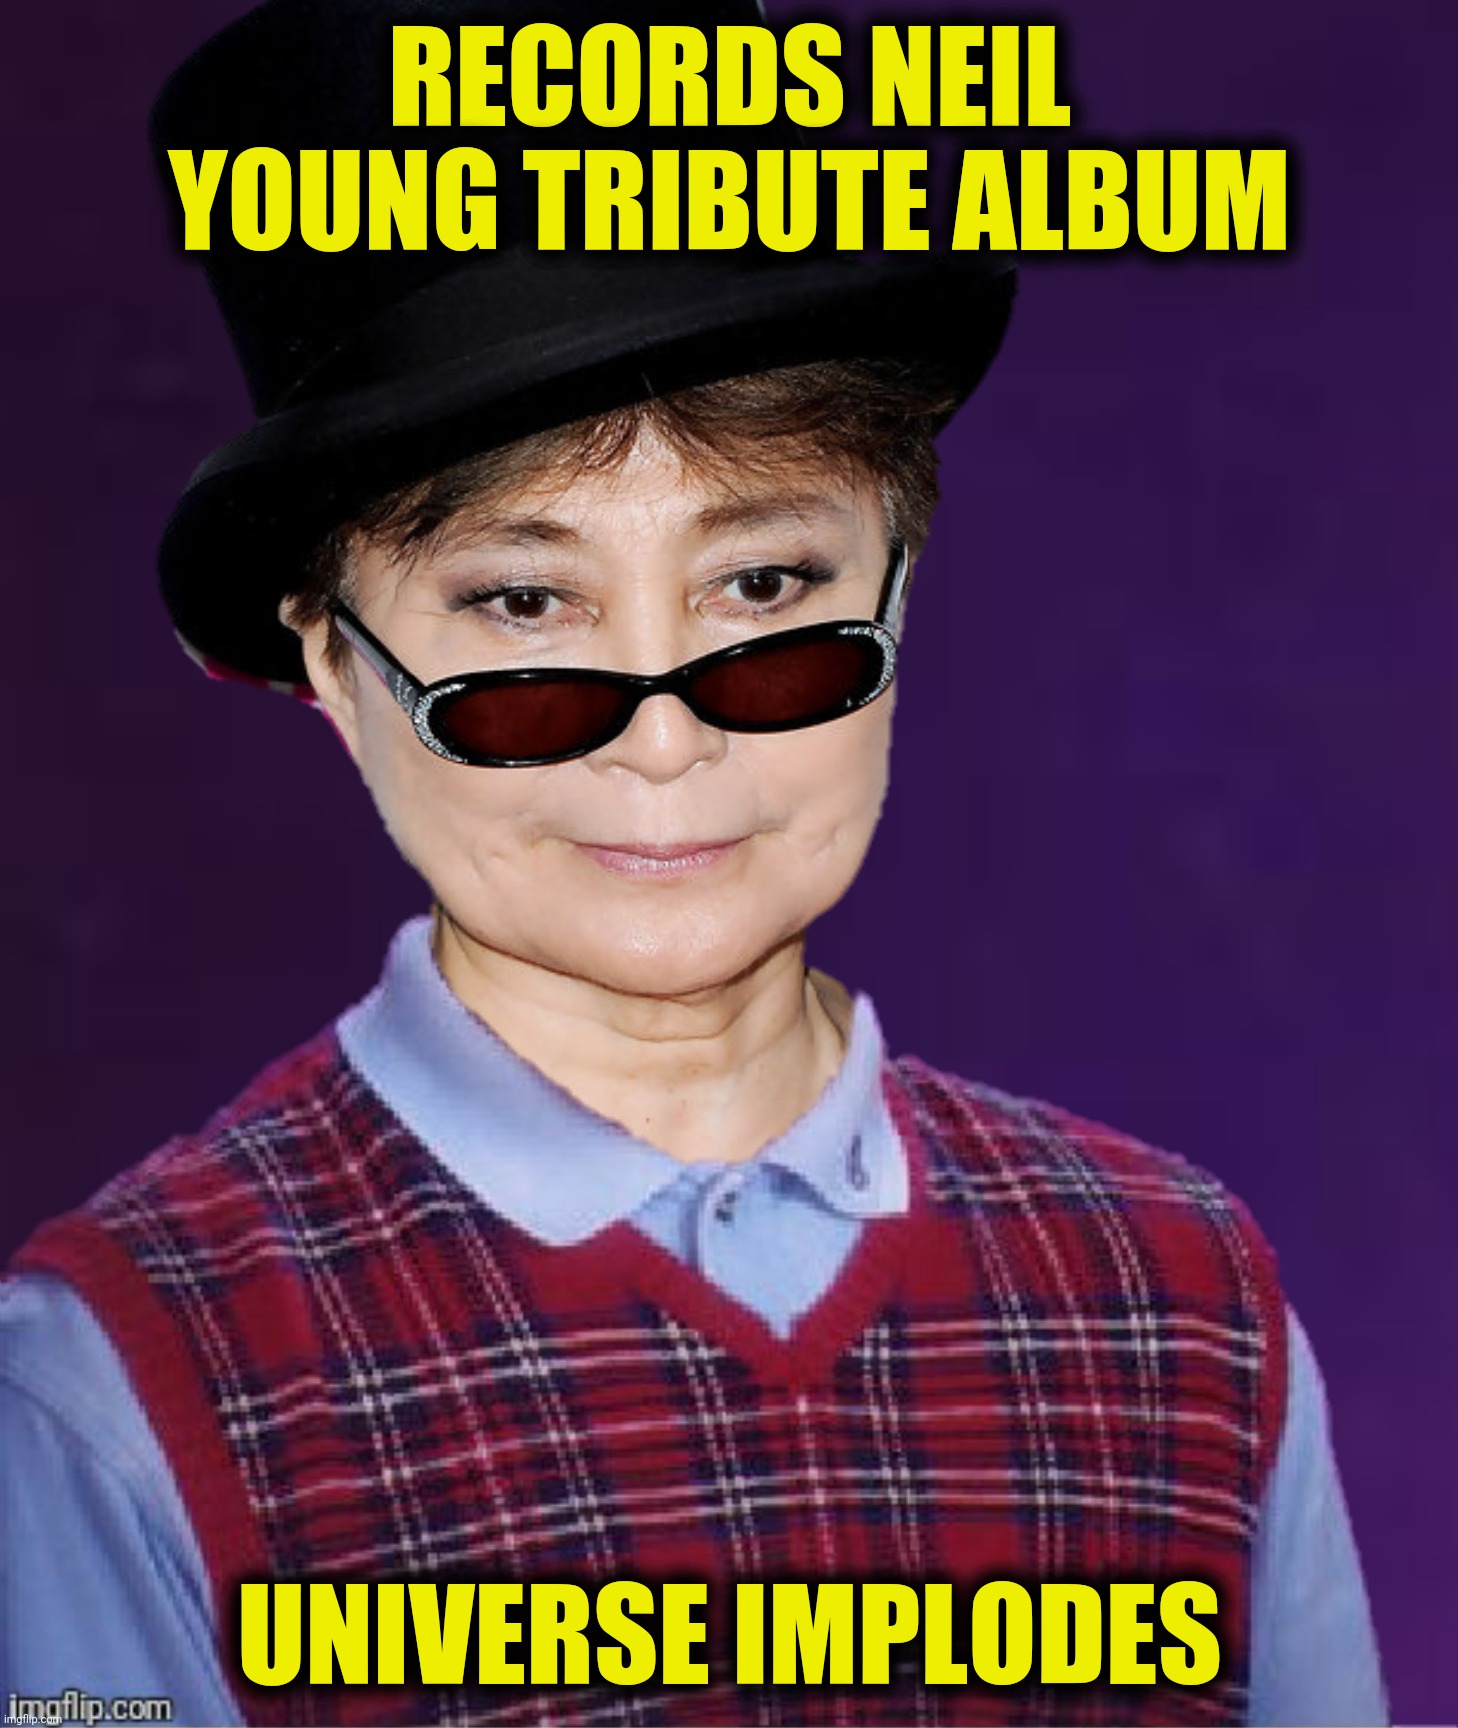 RECORDS NEIL YOUNG TRIBUTE ALBUM UNIVERSE IMPLODES | made w/ Imgflip meme maker